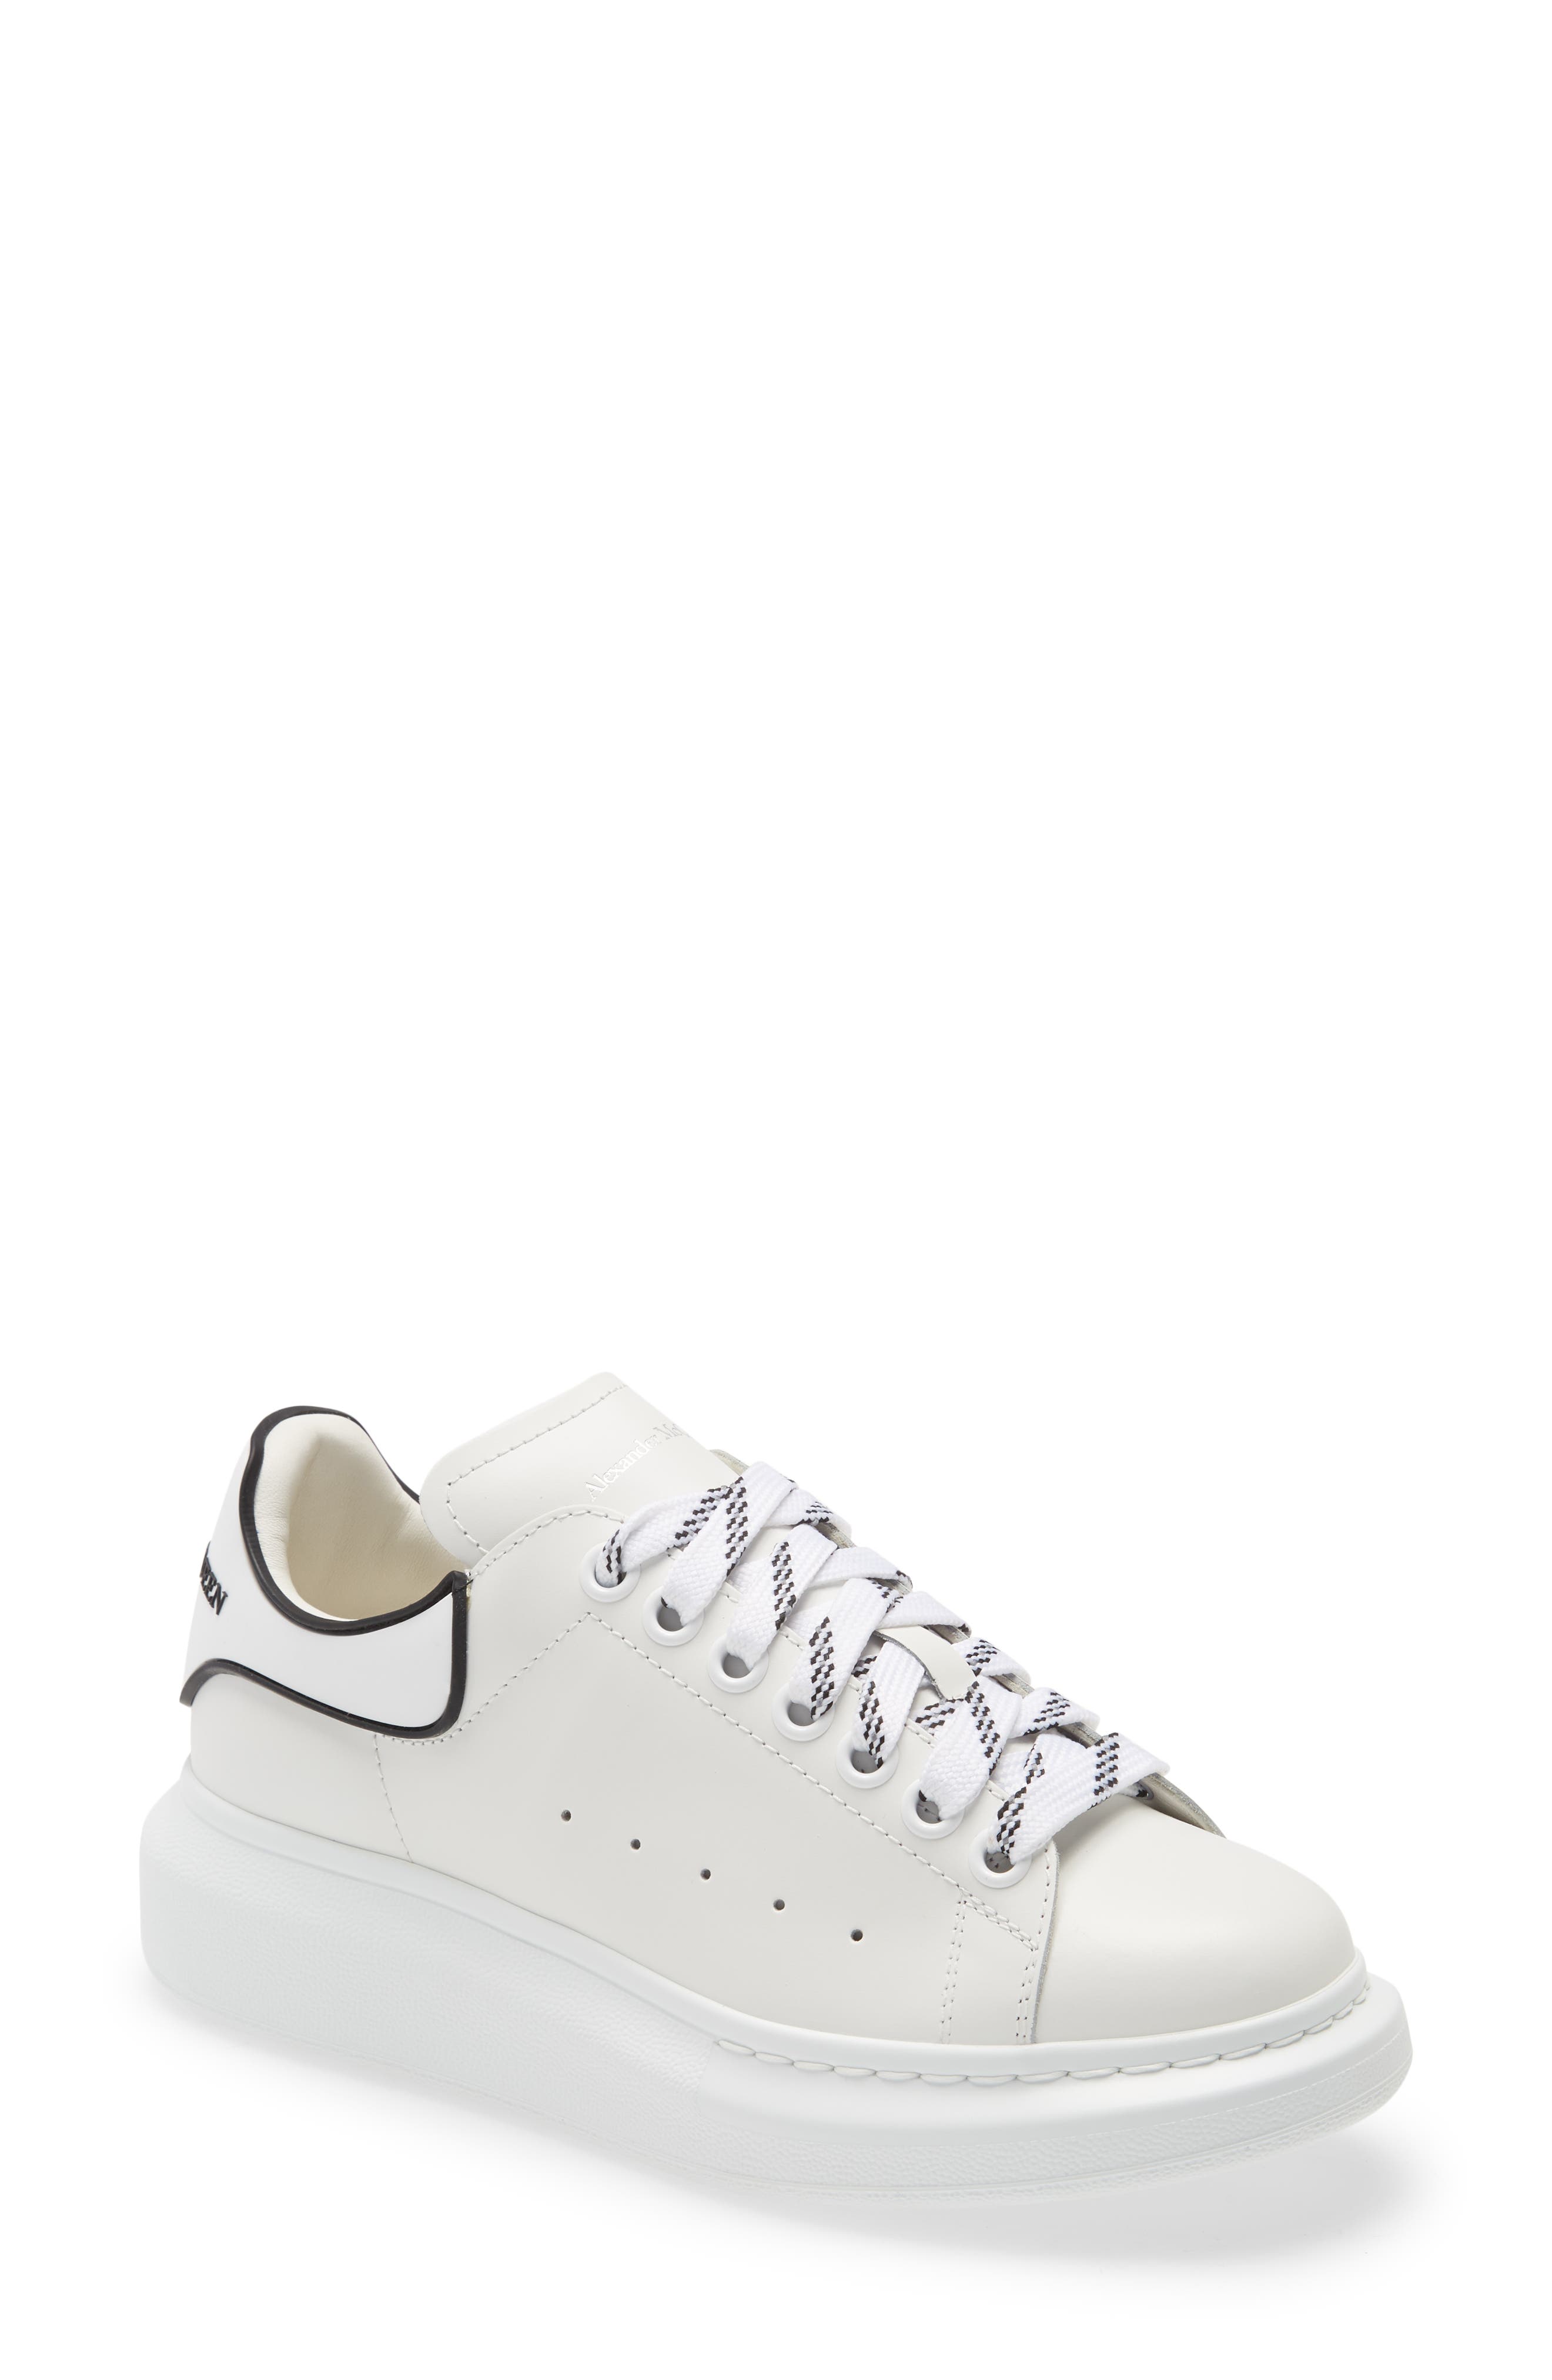 White Sneakers \u0026 Athletic Shoes | Nordstrom